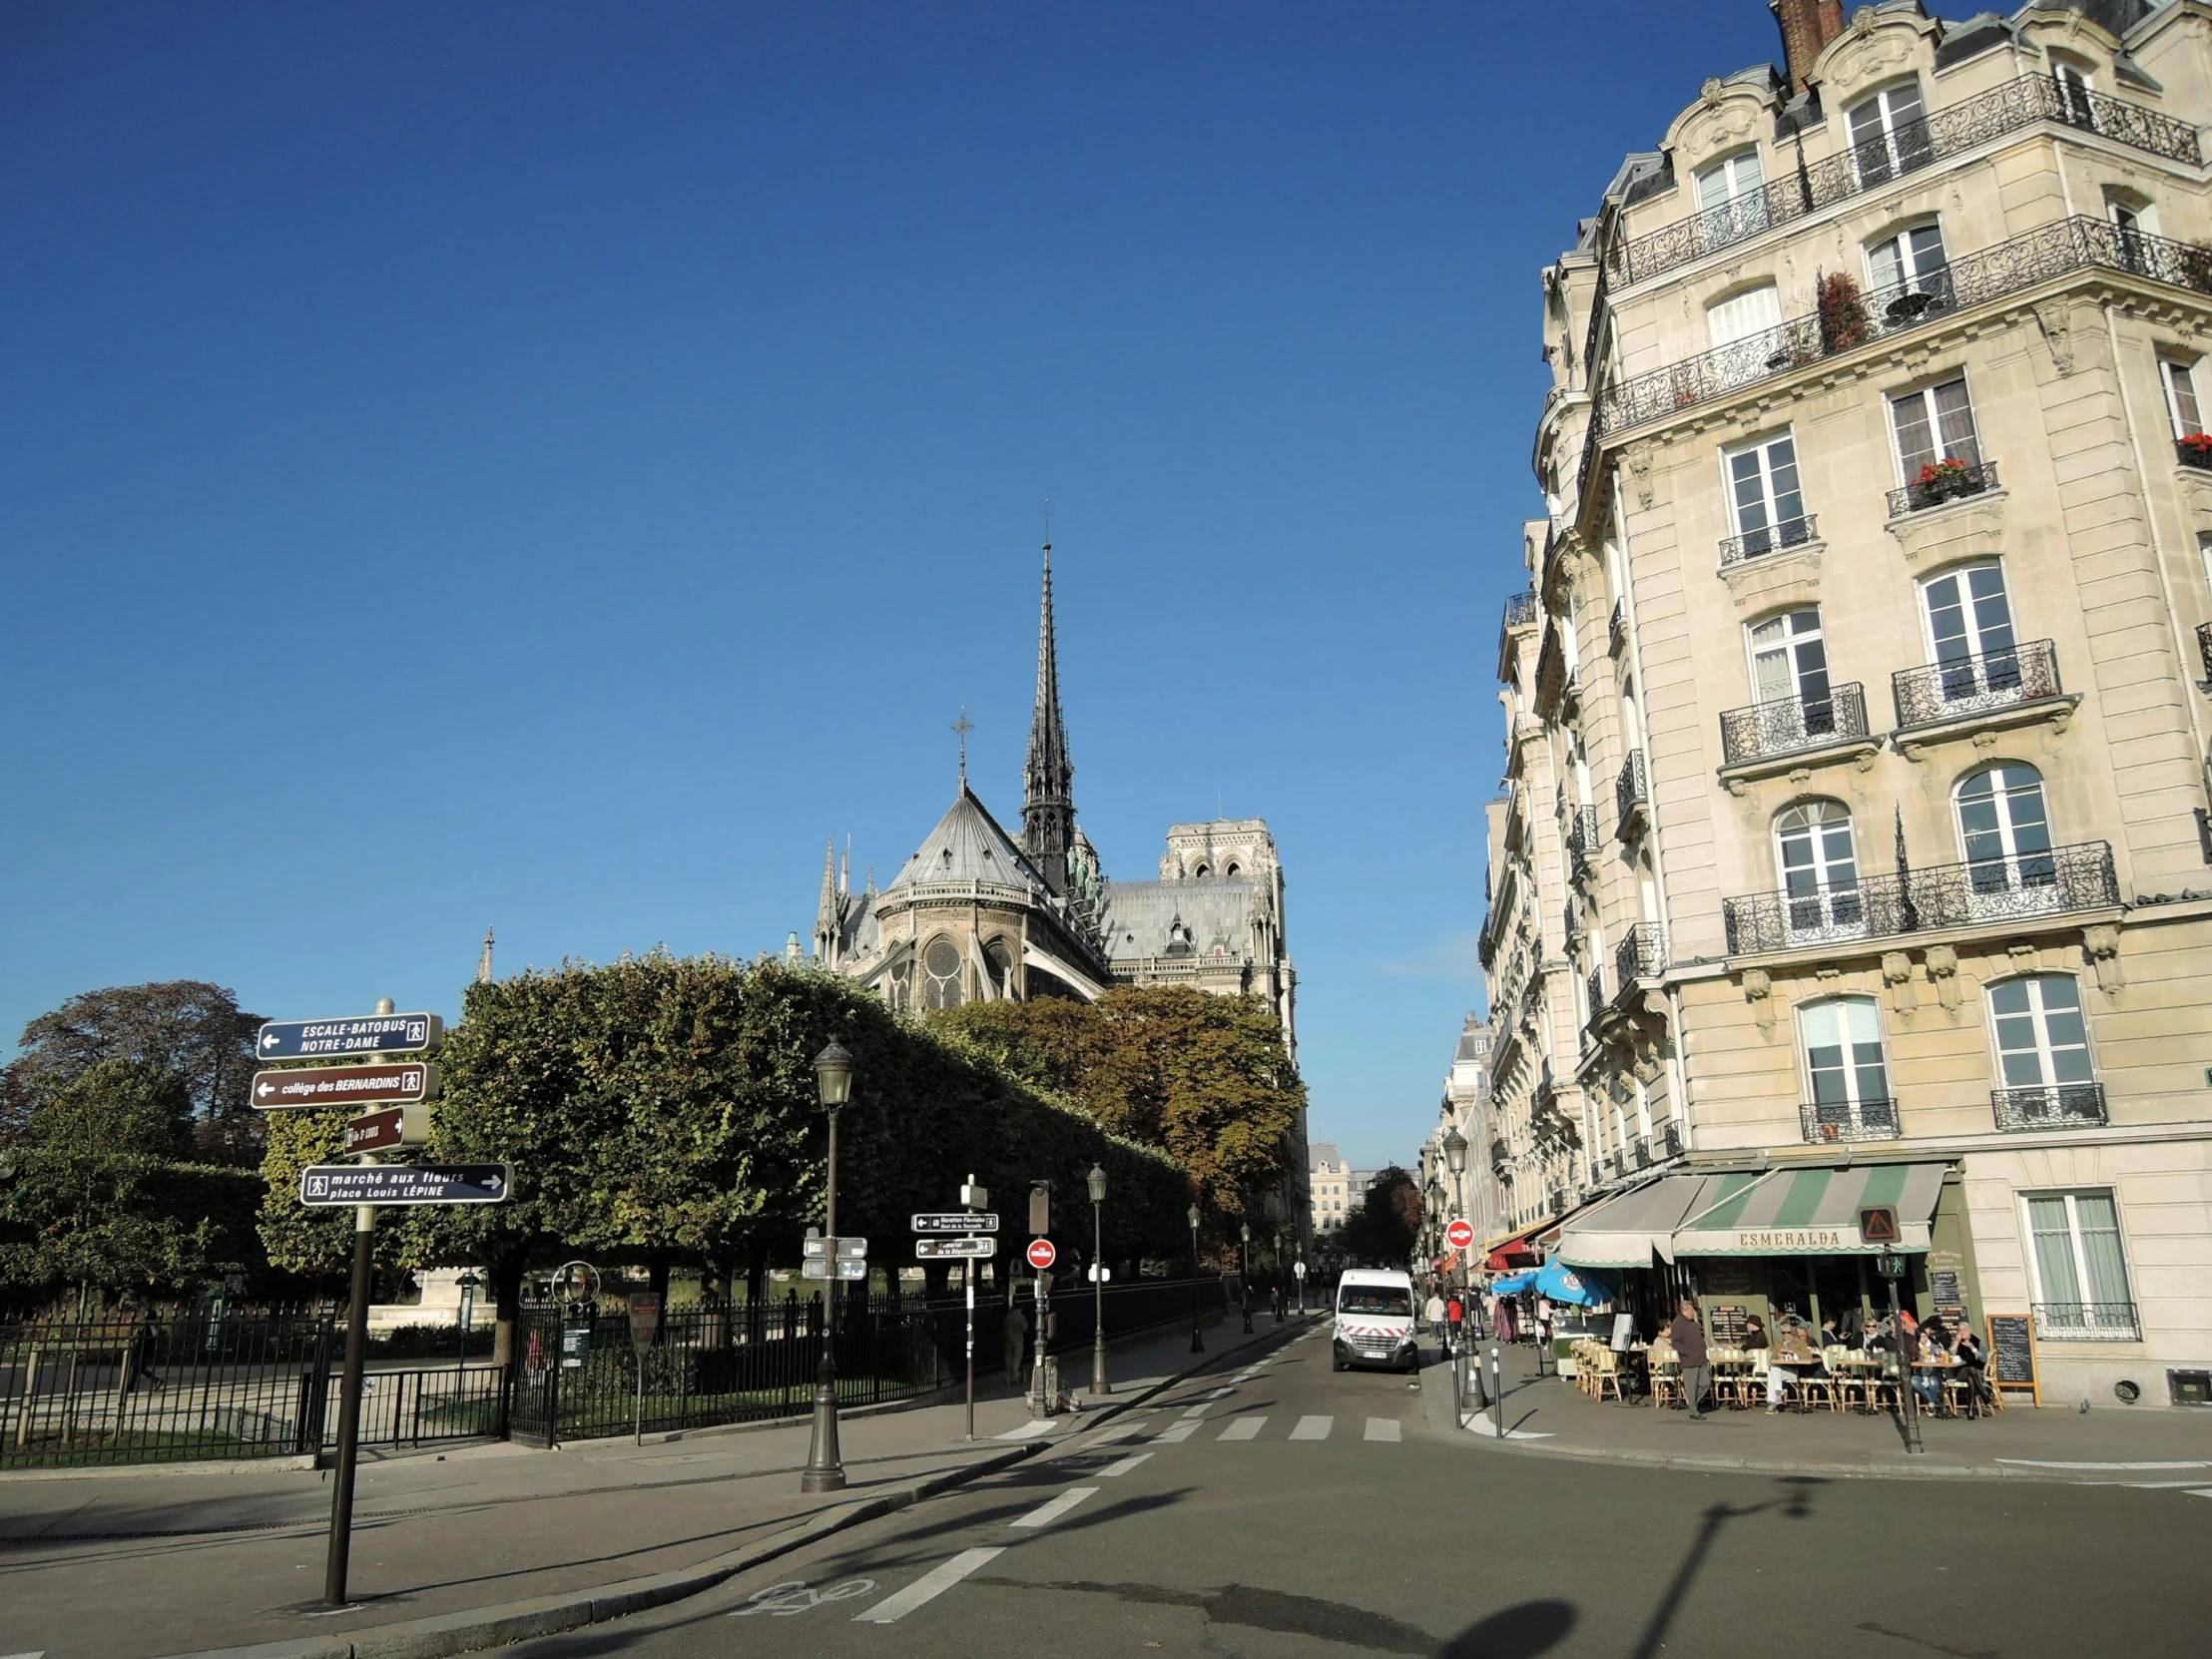 a street filled with lots of traffic next to tall buildings, an album cover, paris school, cathedral in the background, clear blue skies, 2022 photograph, square